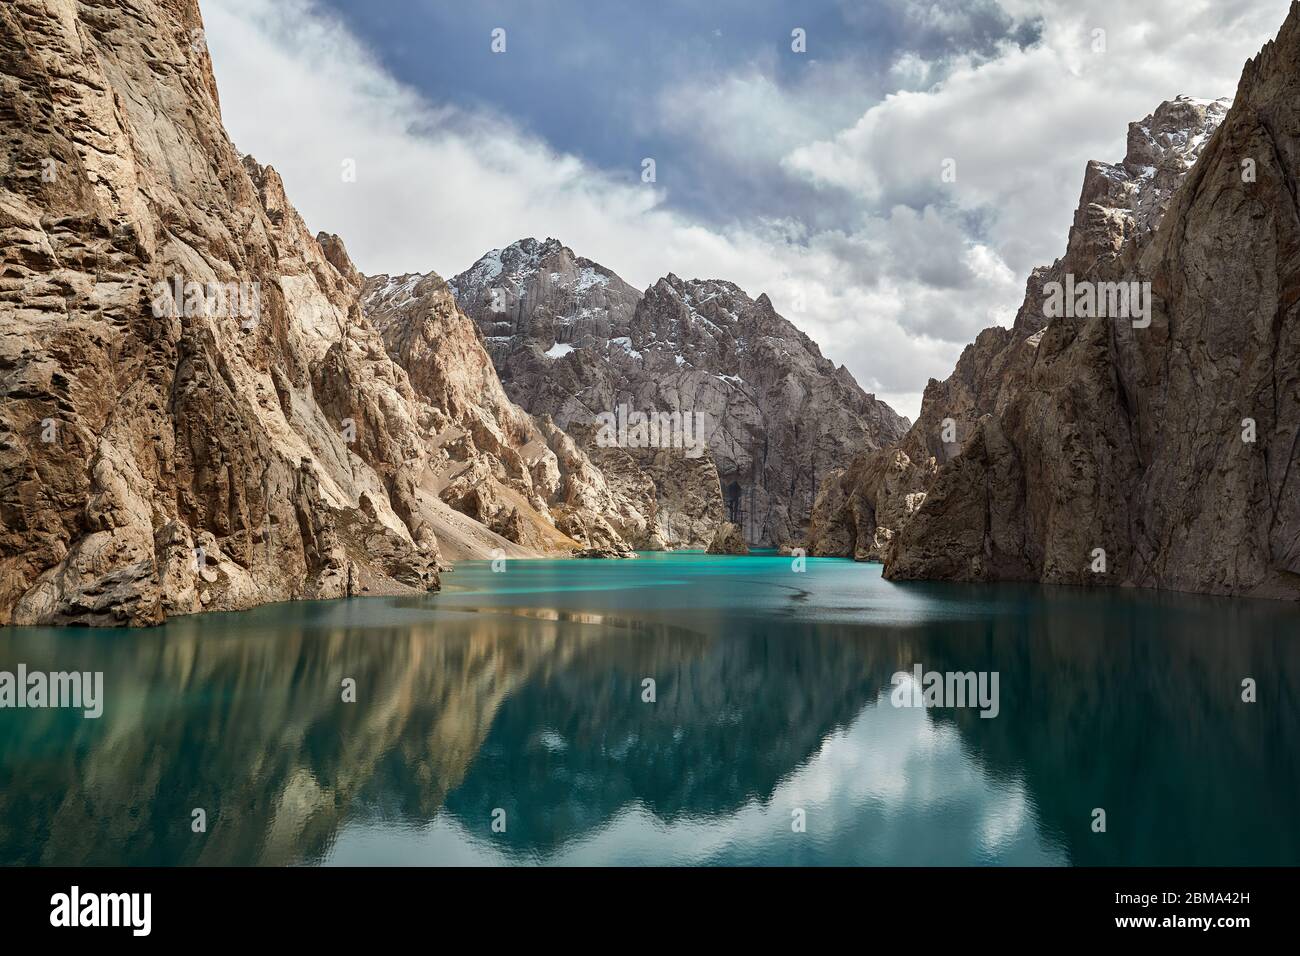 Beautiful landscape of famous mountain Lake Kel Suu. Located near Chinese border in Kyrgyzstan Stock Photo